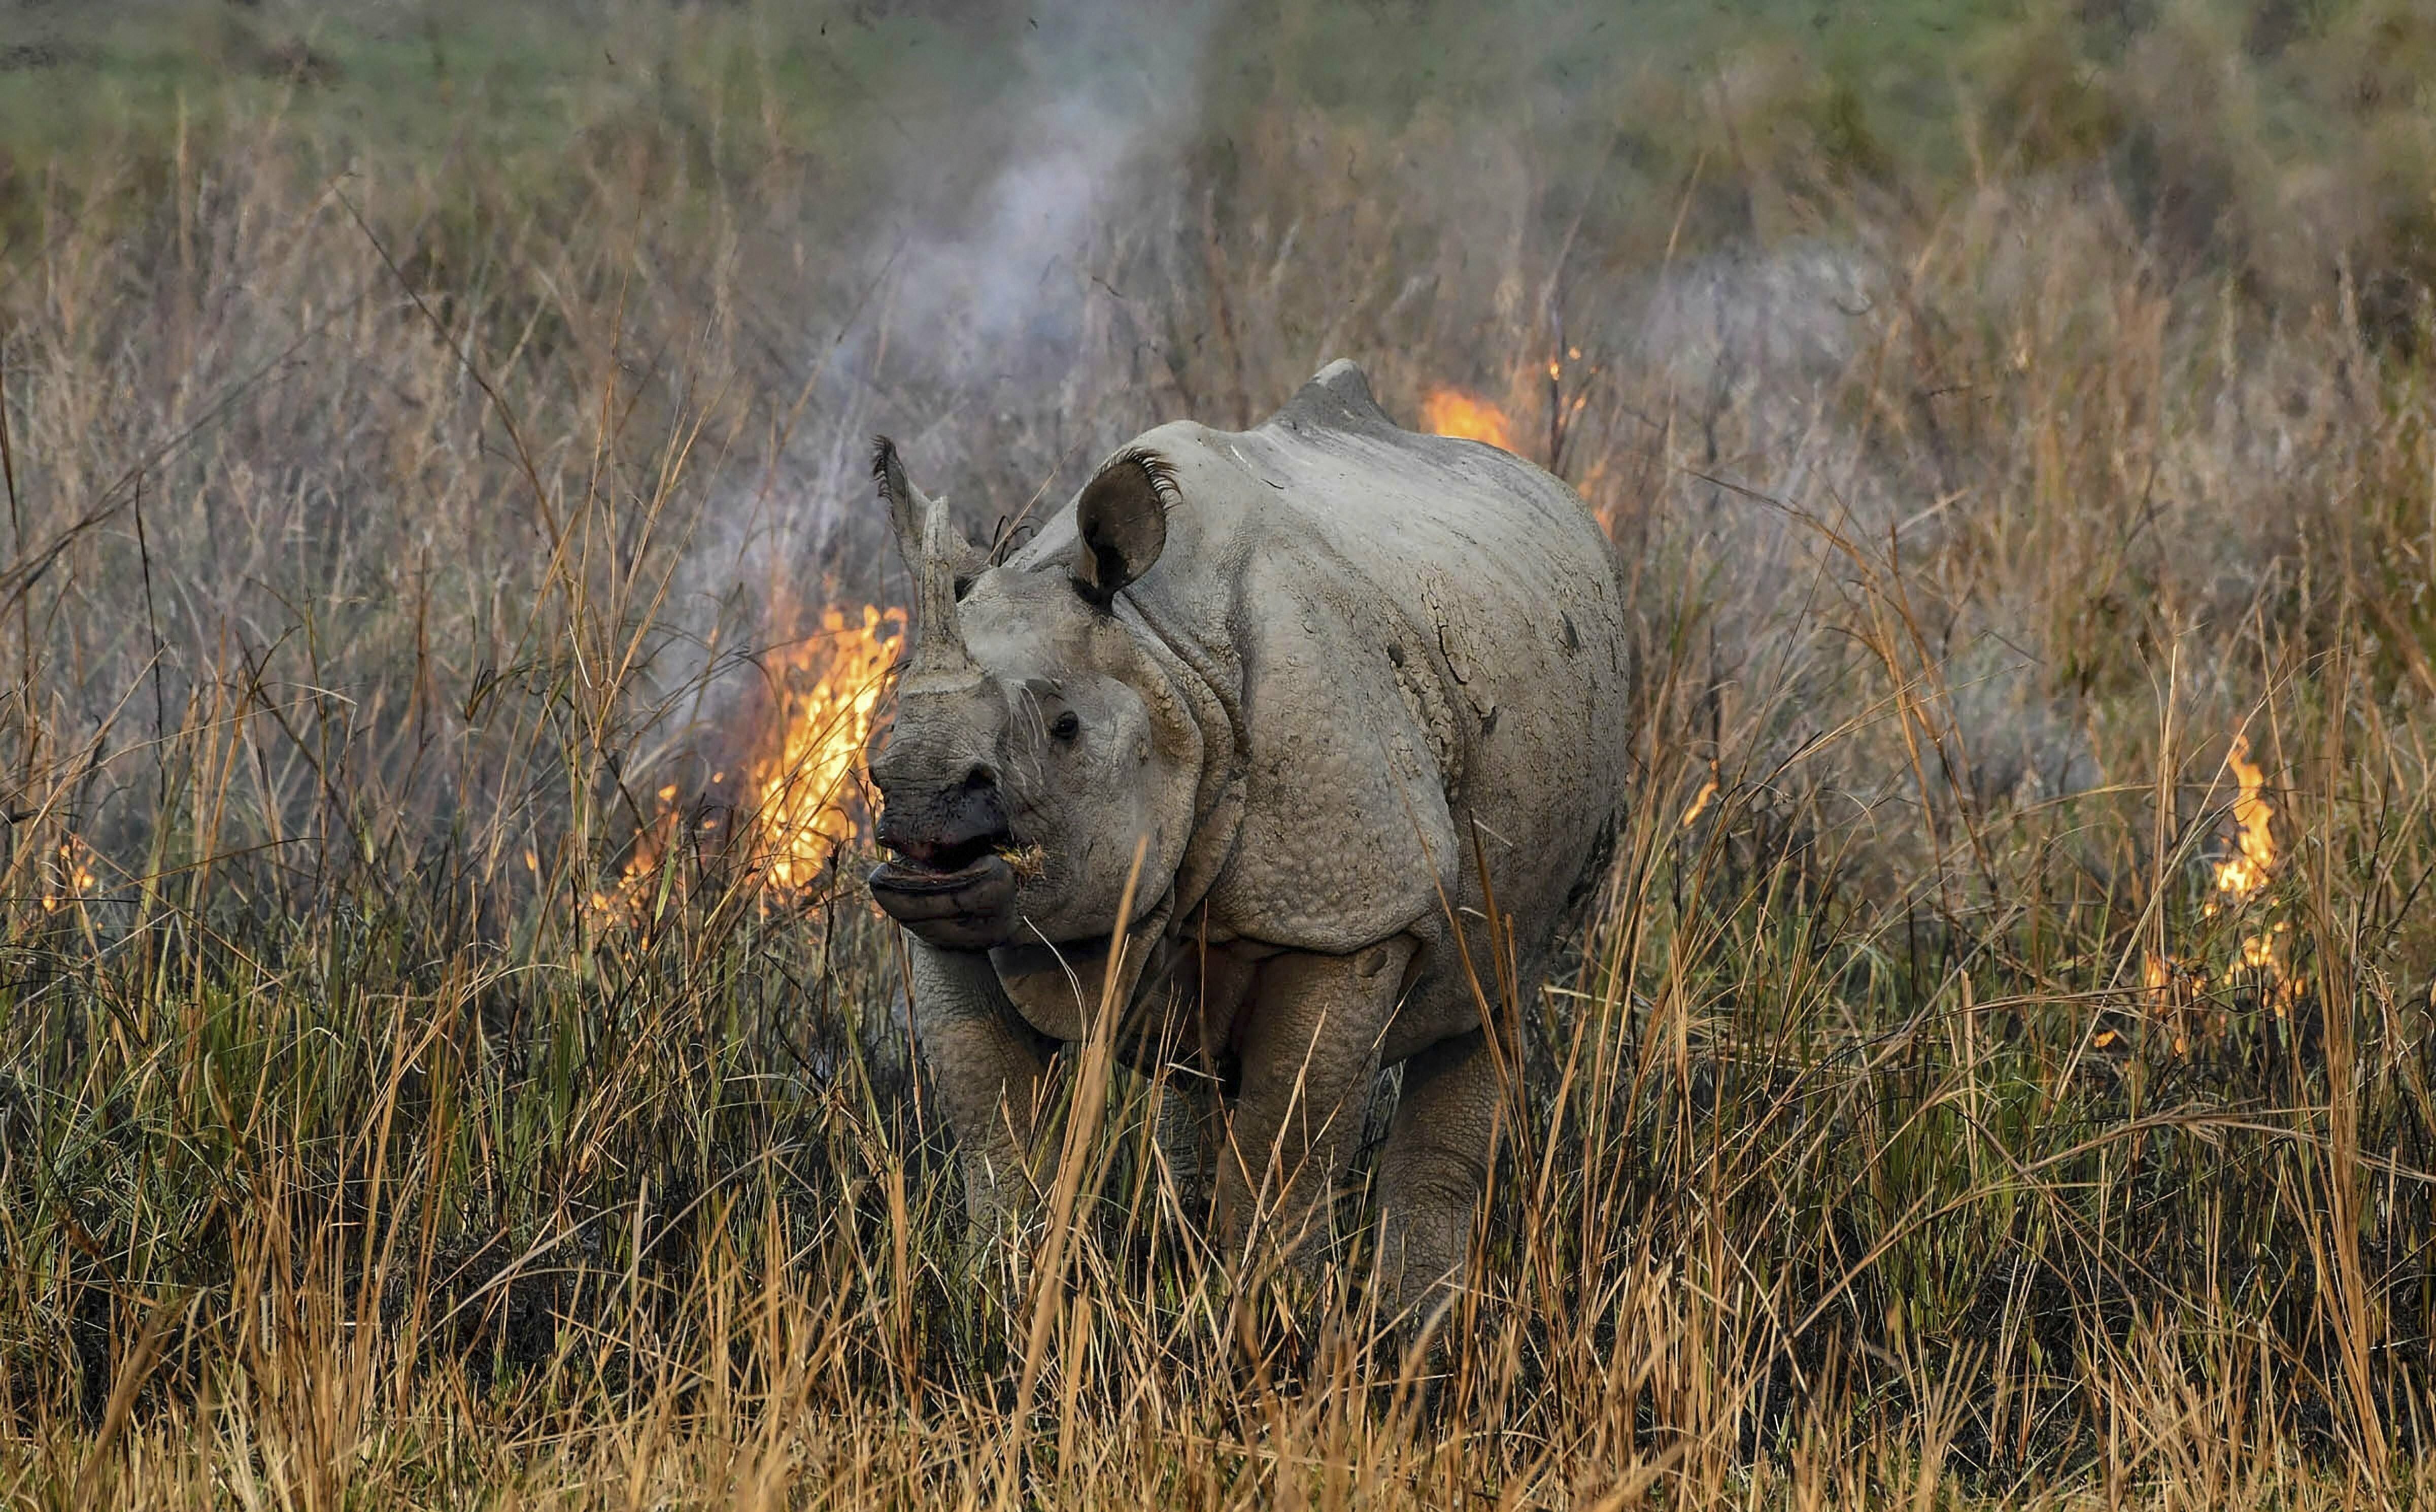 A one-horned rhinoceros walks amidst wildfire at Pobitora Wildlife Sanctuary in Morigaon district of Assam - PTI